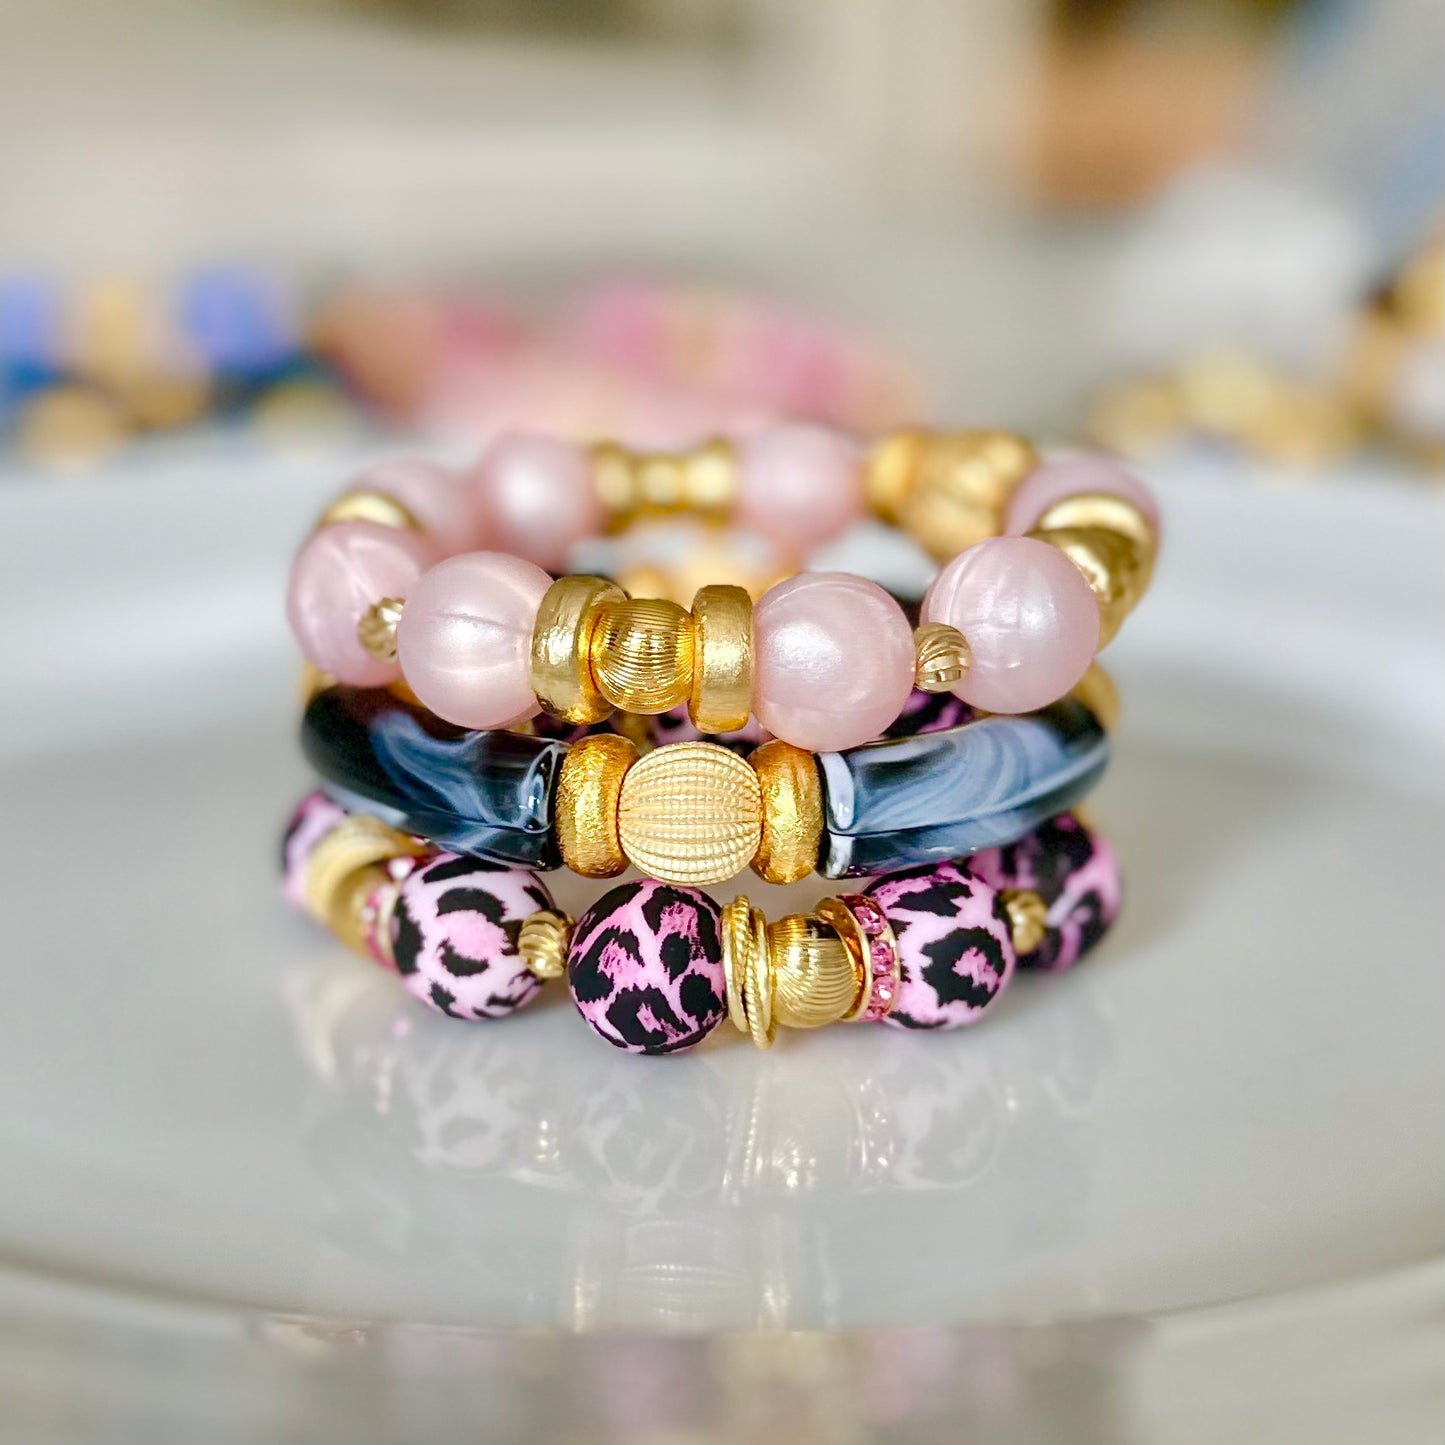 PINK AND BLACK CHEETAH BANGLE WITH GOLD ACCENTS